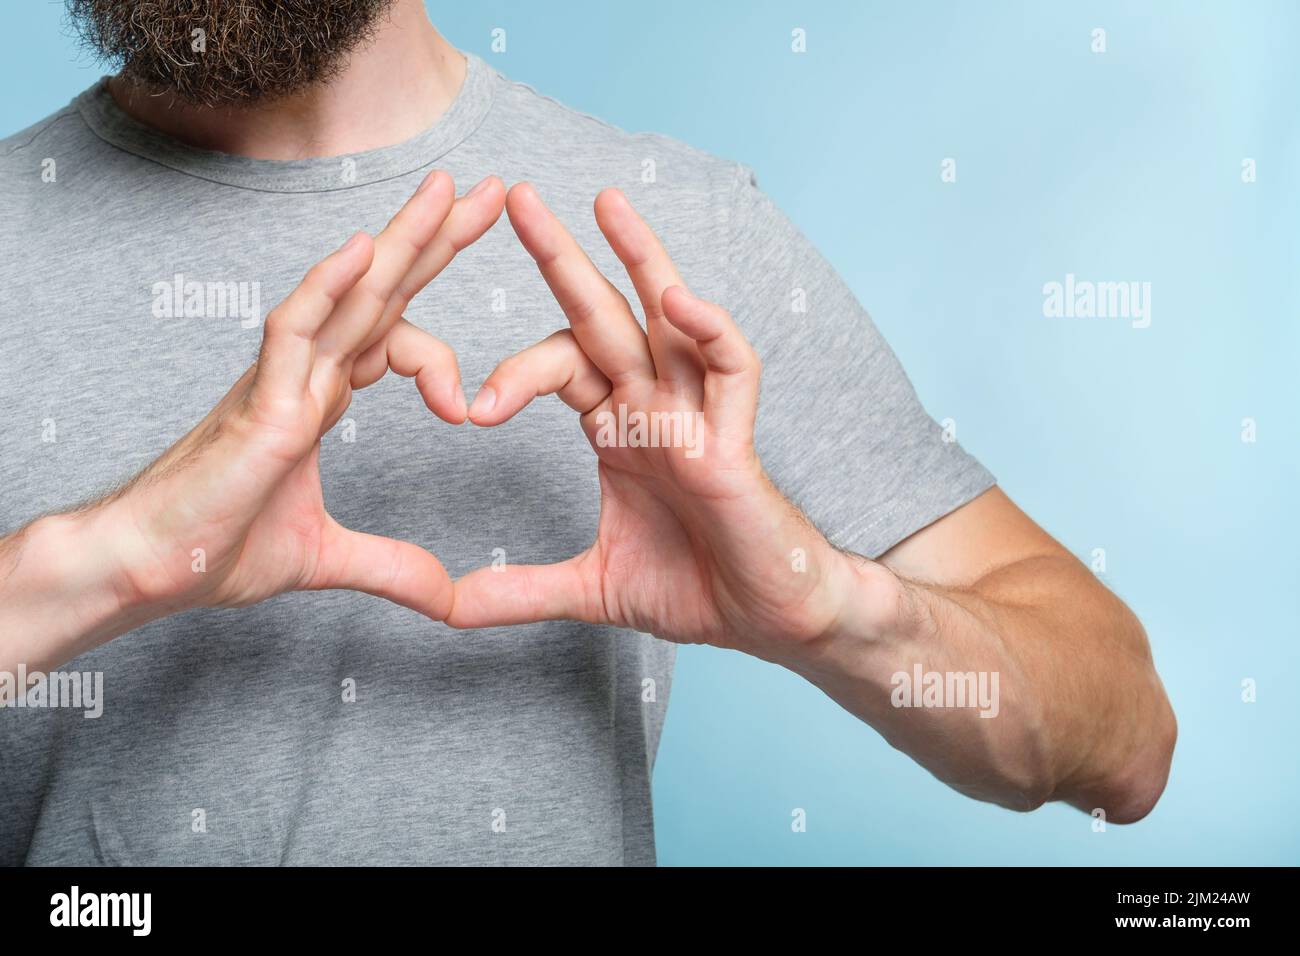 love emotion expression heart shape hands gesture Stock Photo